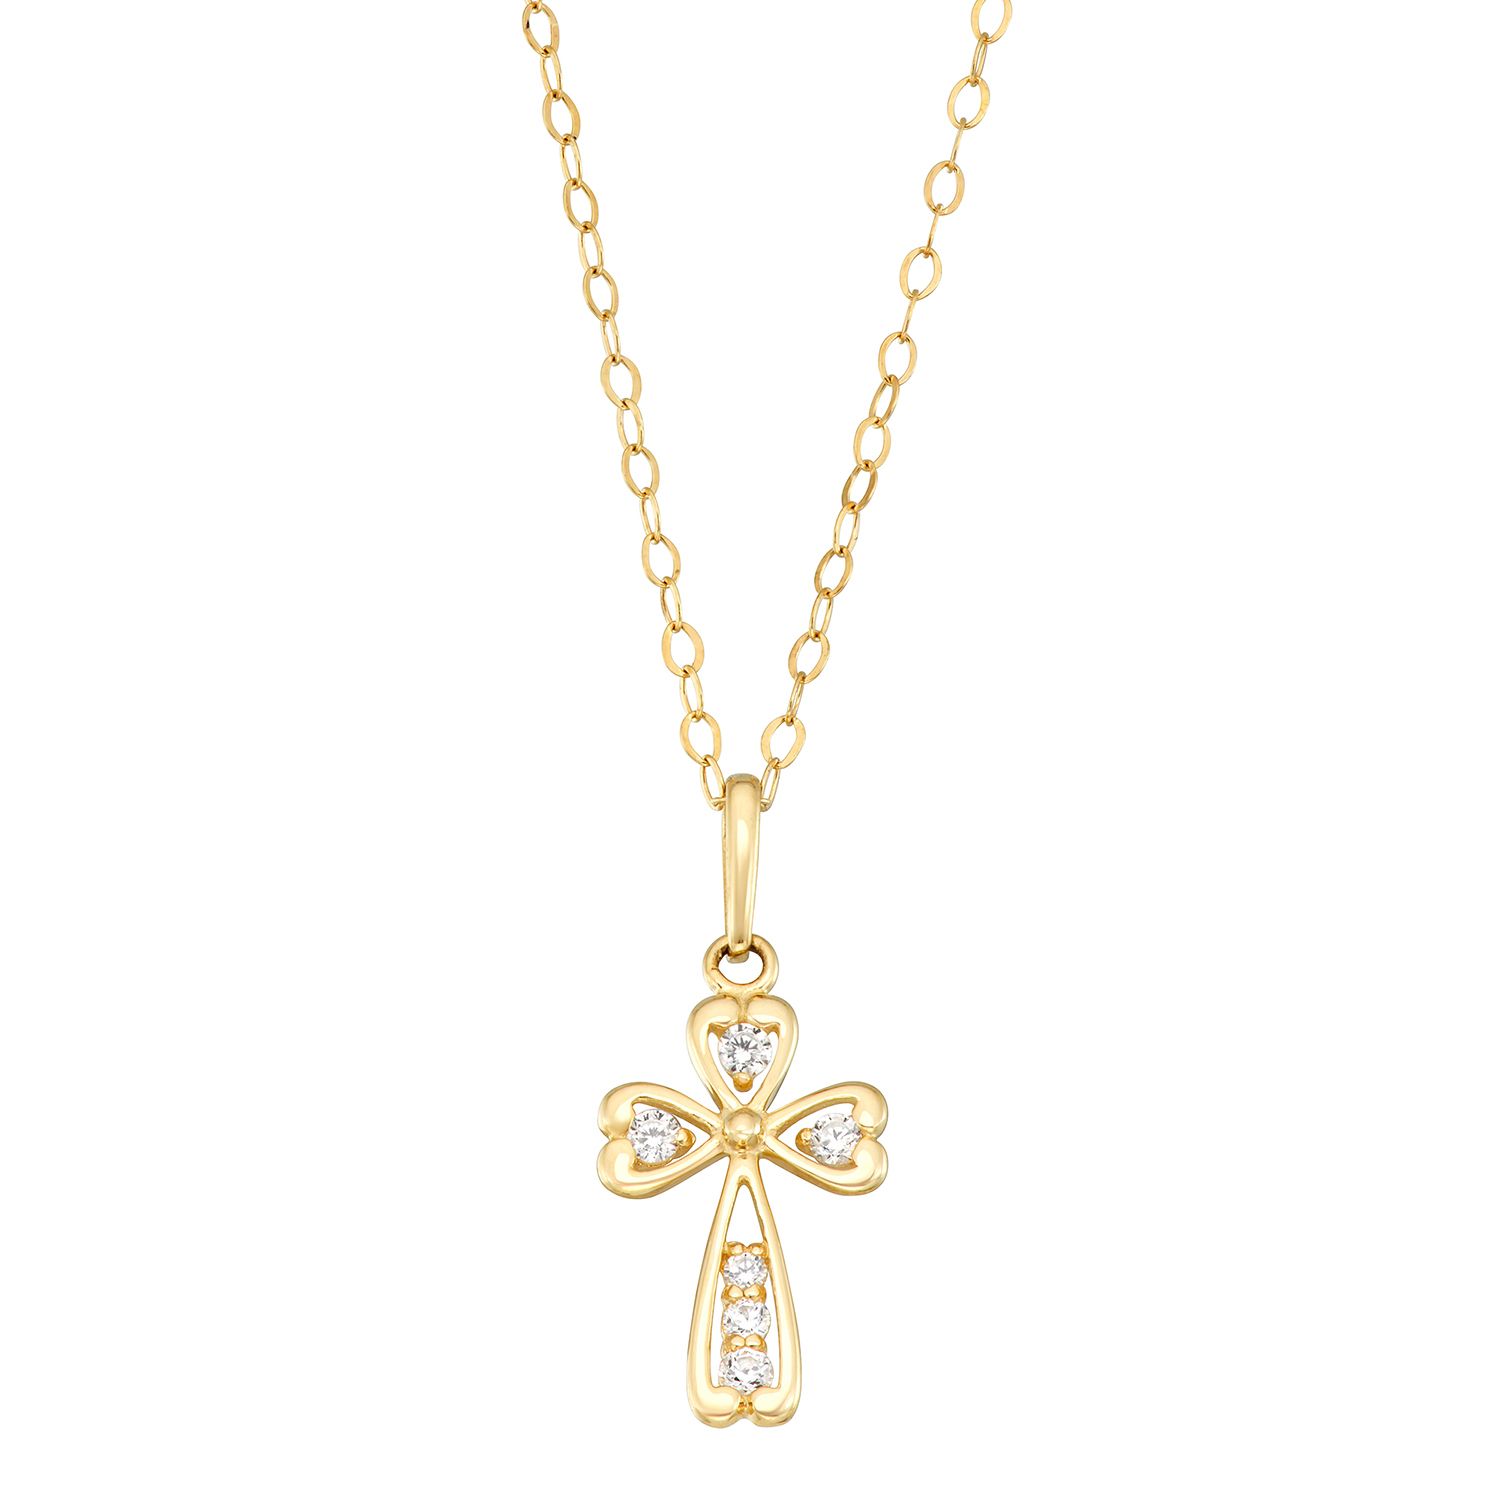 Gold Cubic Zirconia Cross Necklace on Sale, 59% OFF 